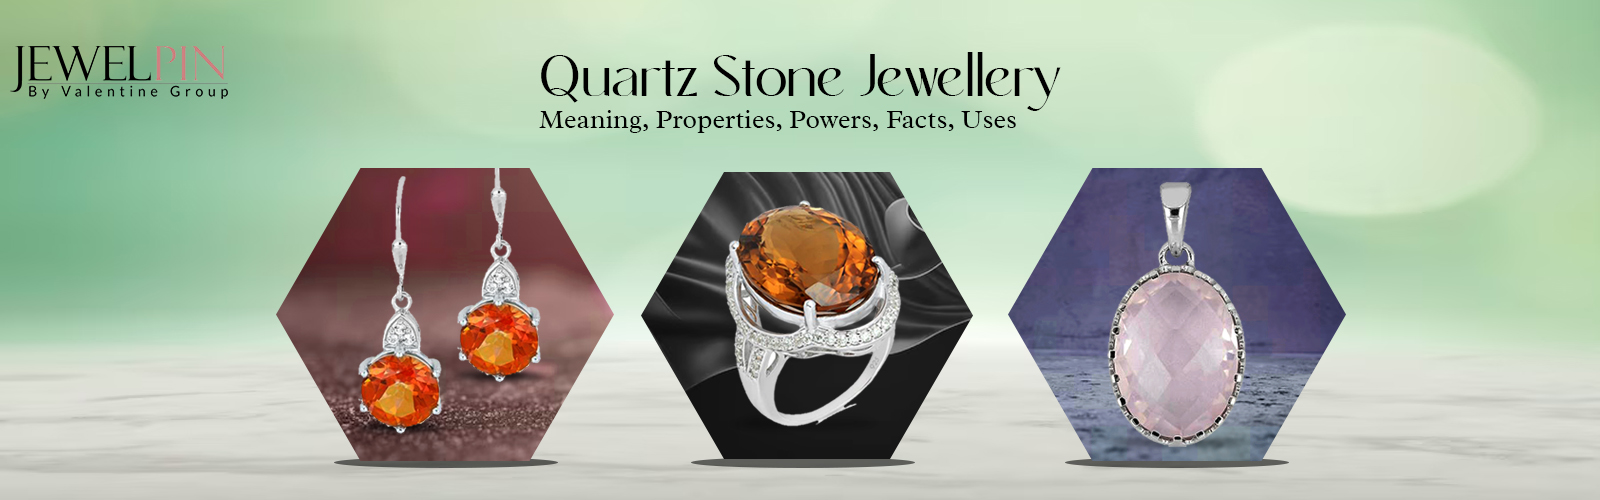 quartz stone jewellery meaning properties powers facts uses